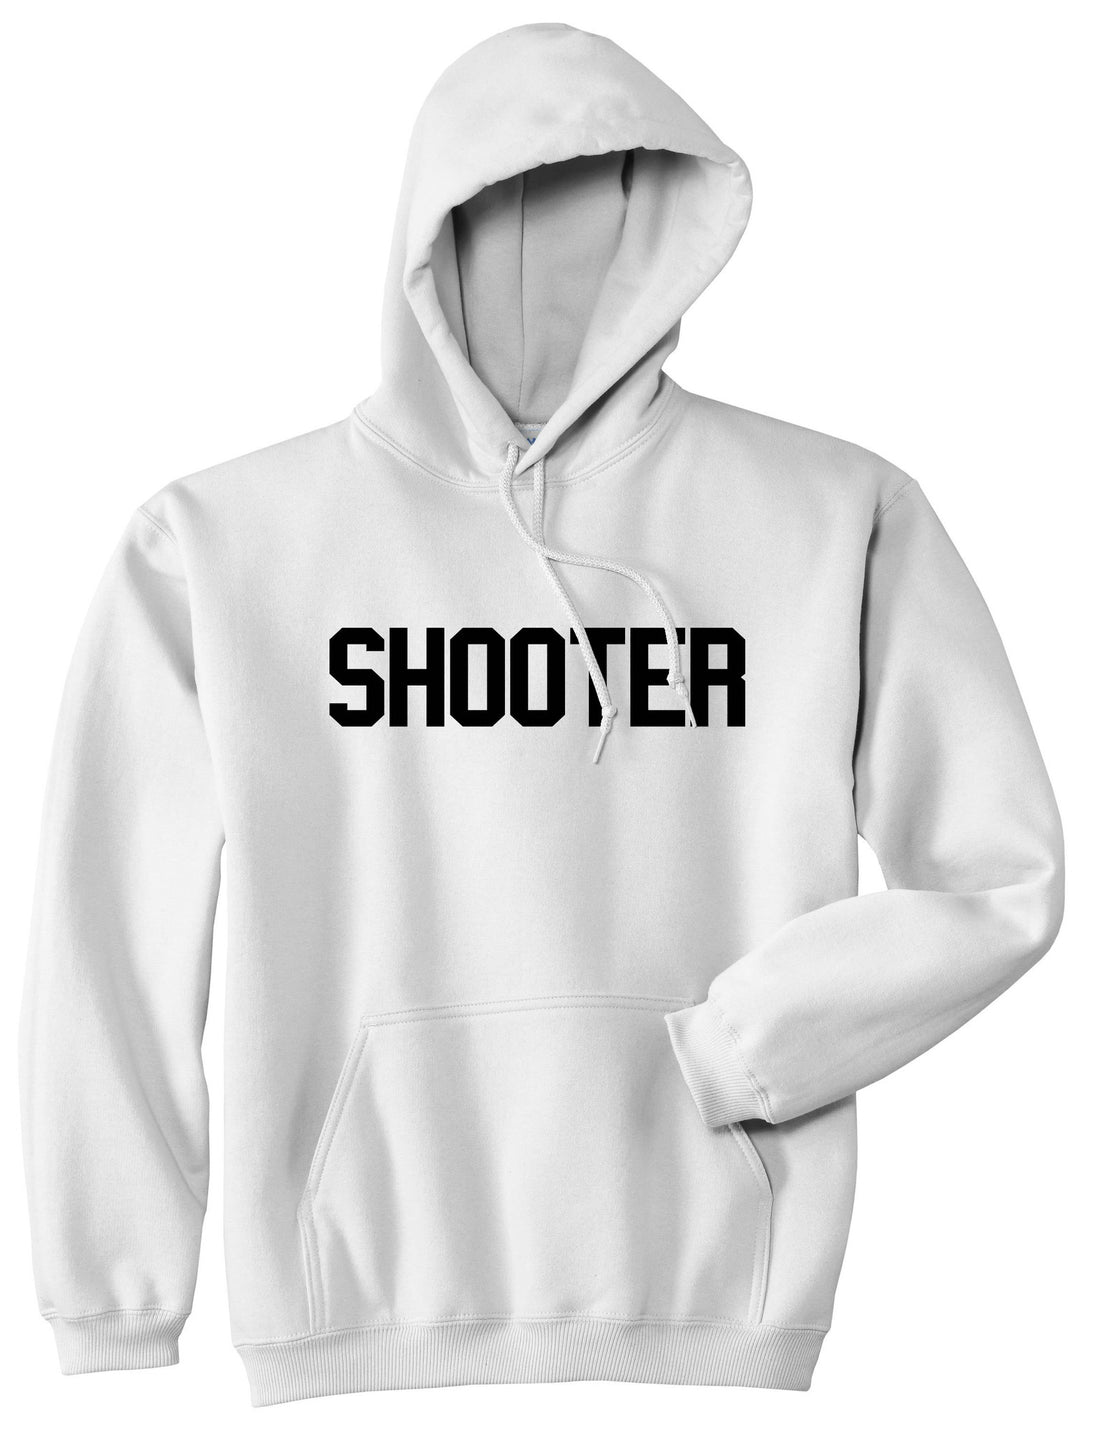 Shooter Pullover Hoodie Hoody by Kings Of NY